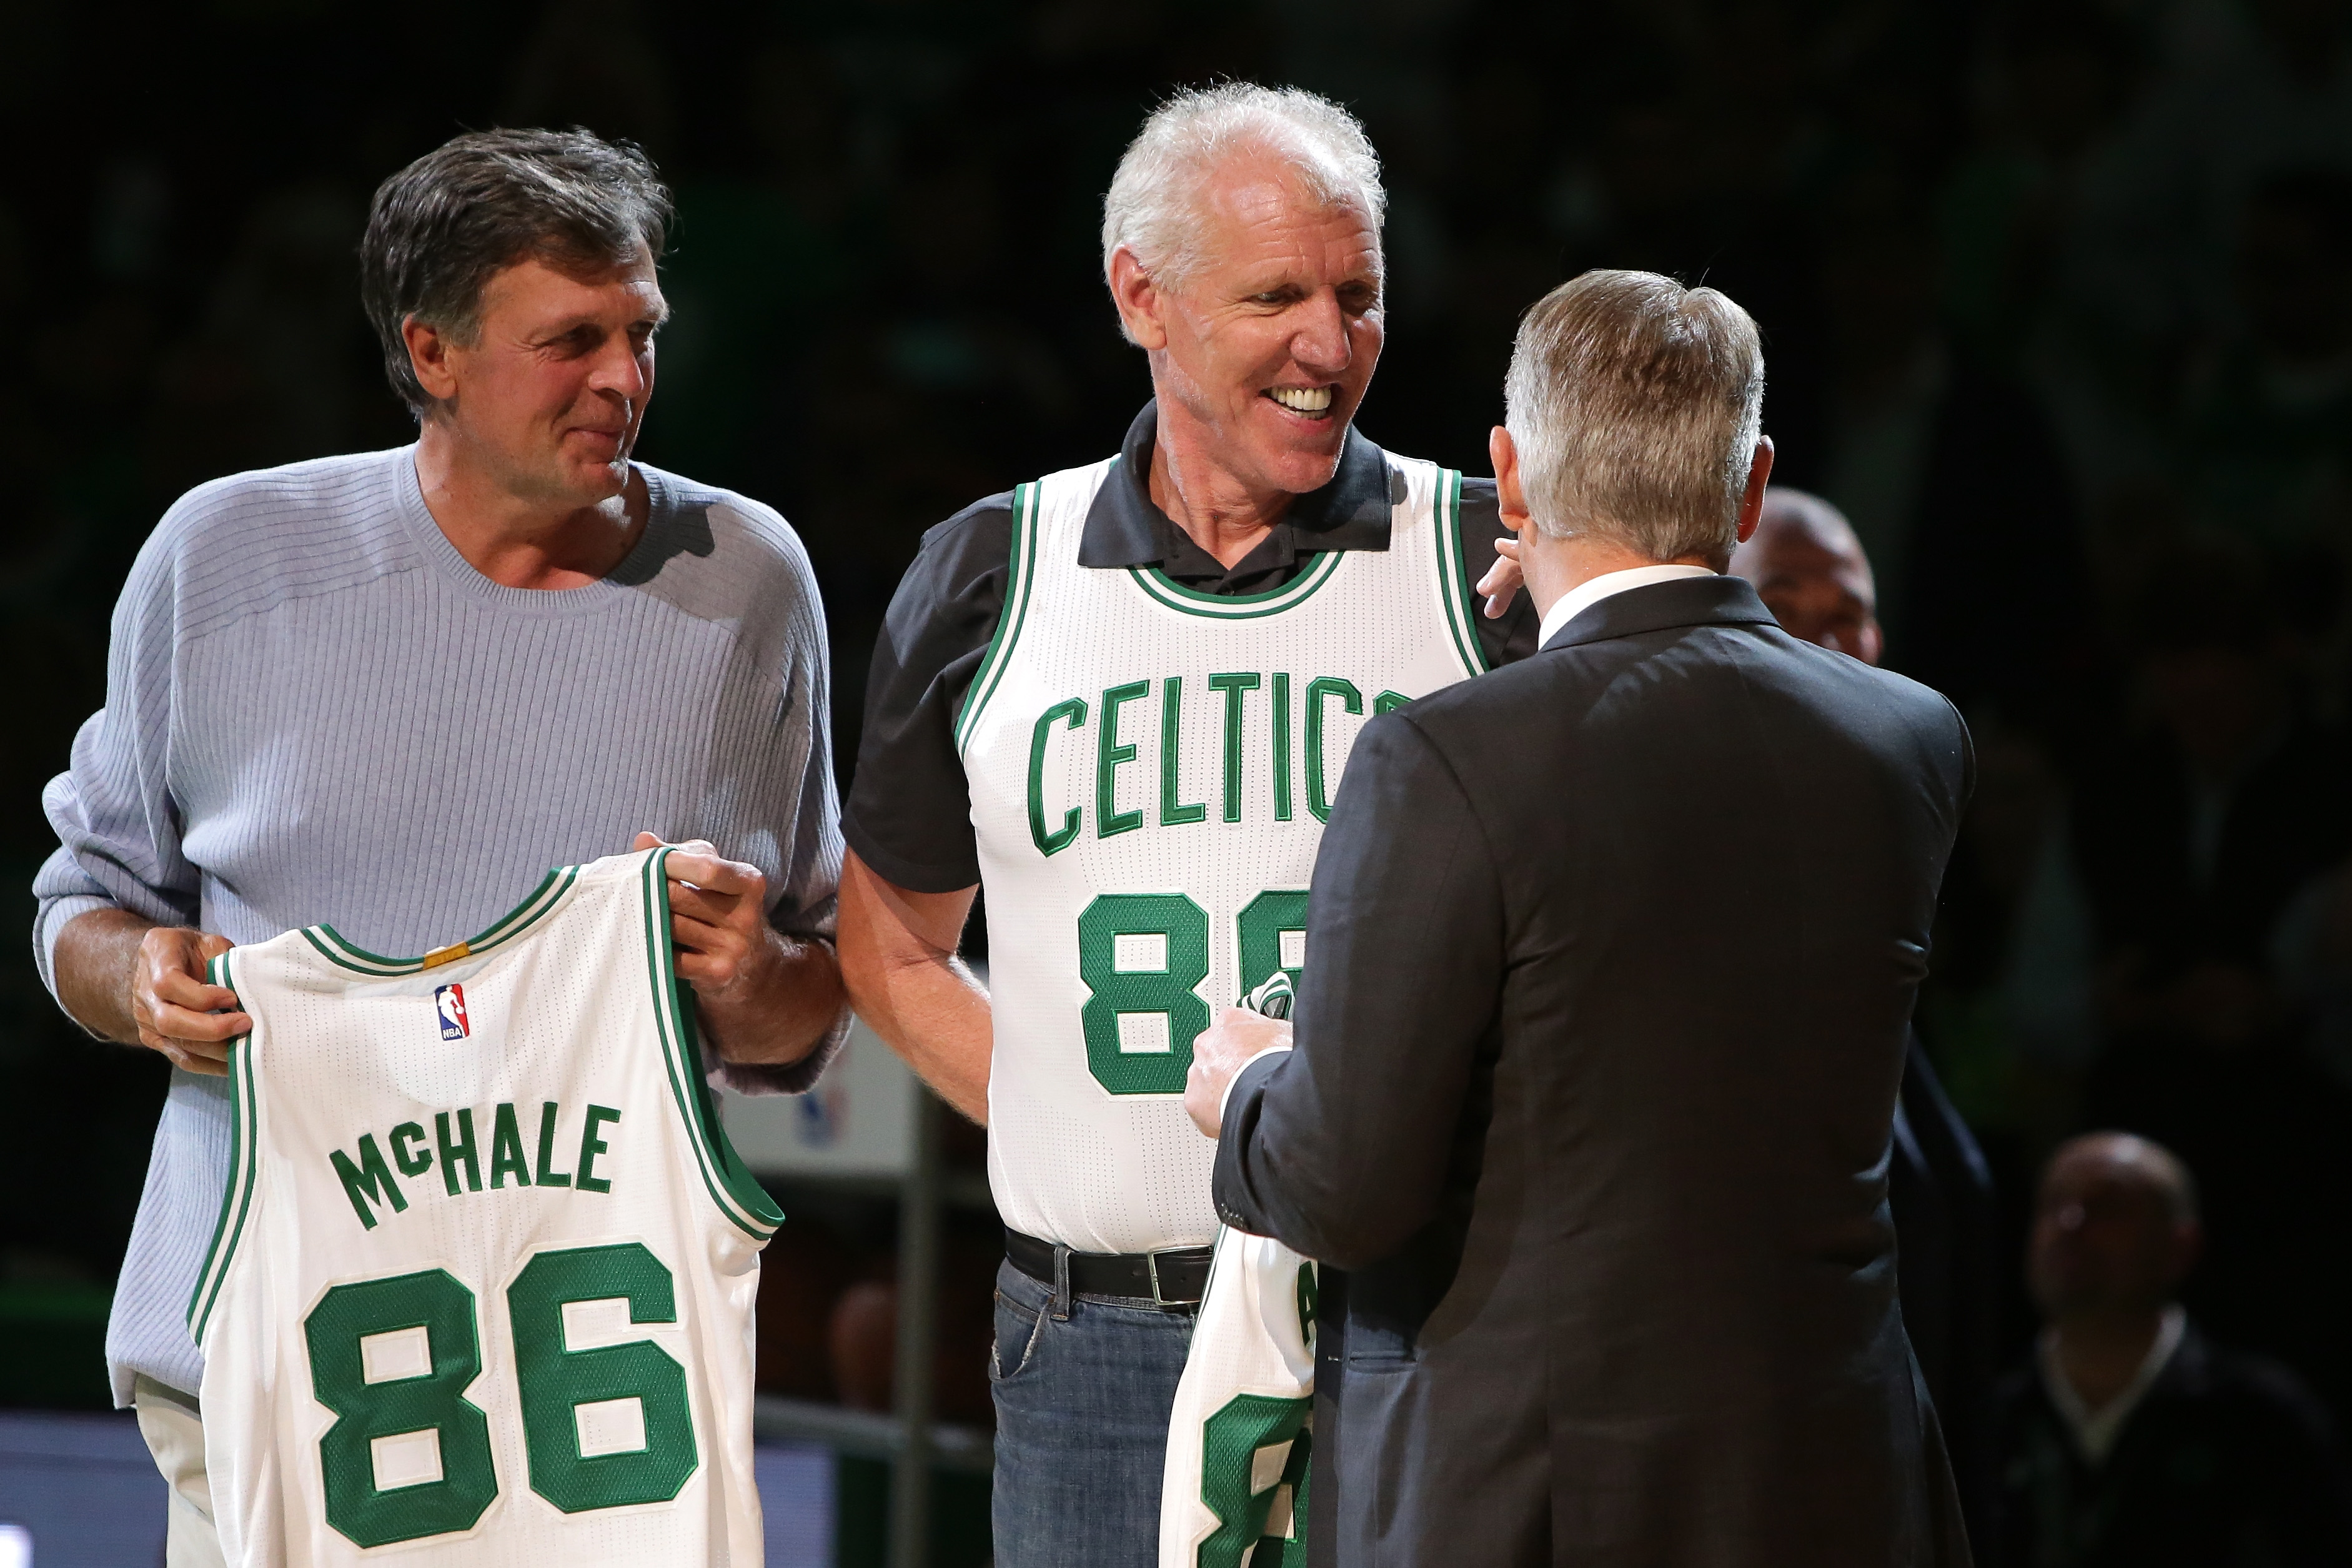 Bill Walton's career was revived with 1985-86 Celtics